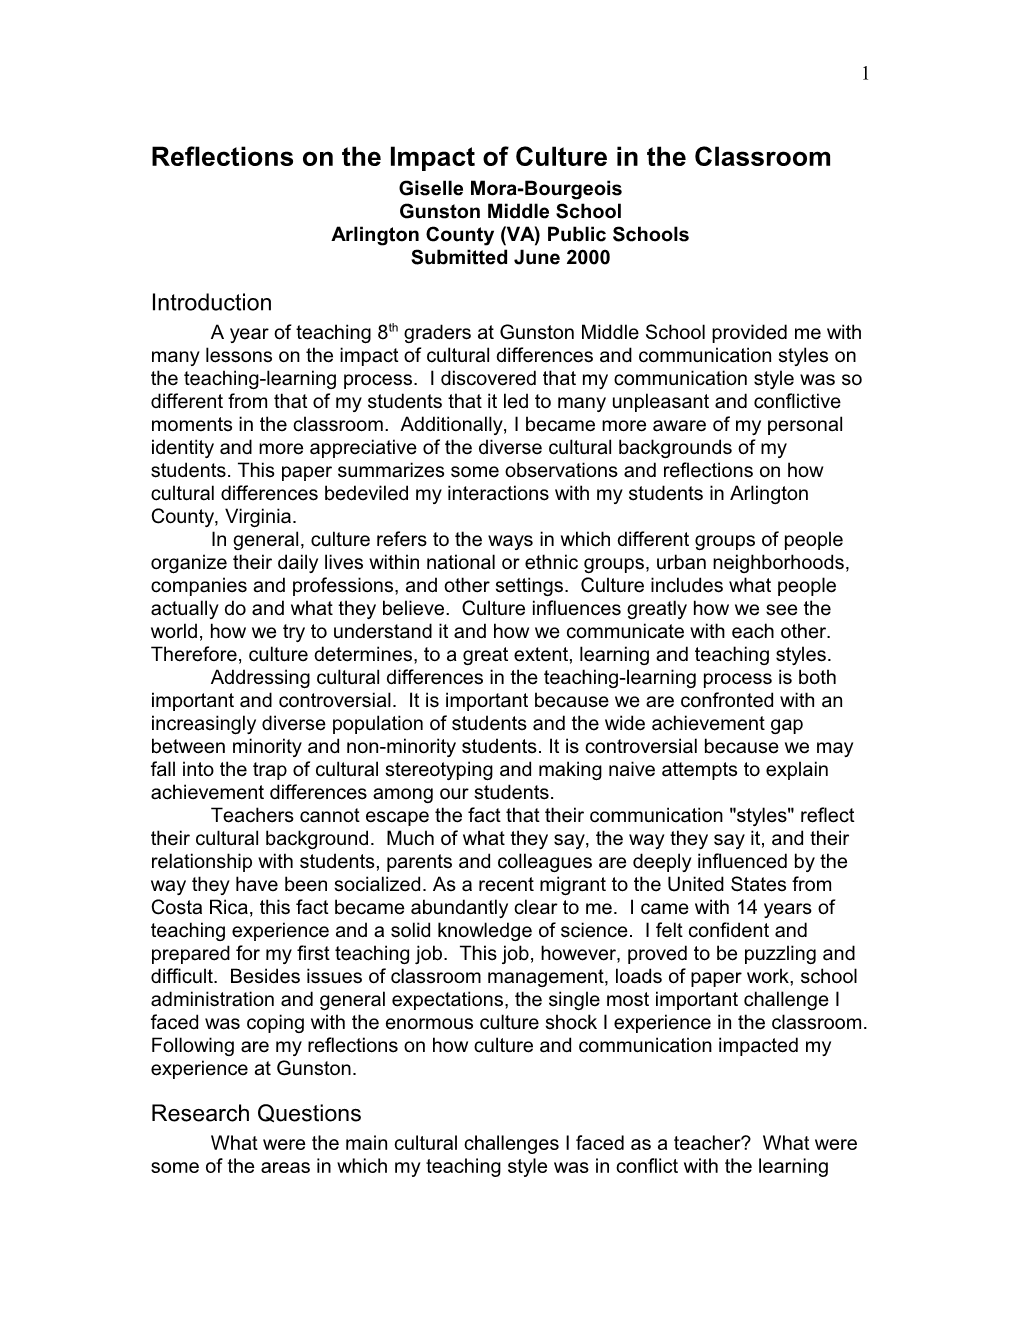 Reflections On The Impact Of Culture In The Classroom